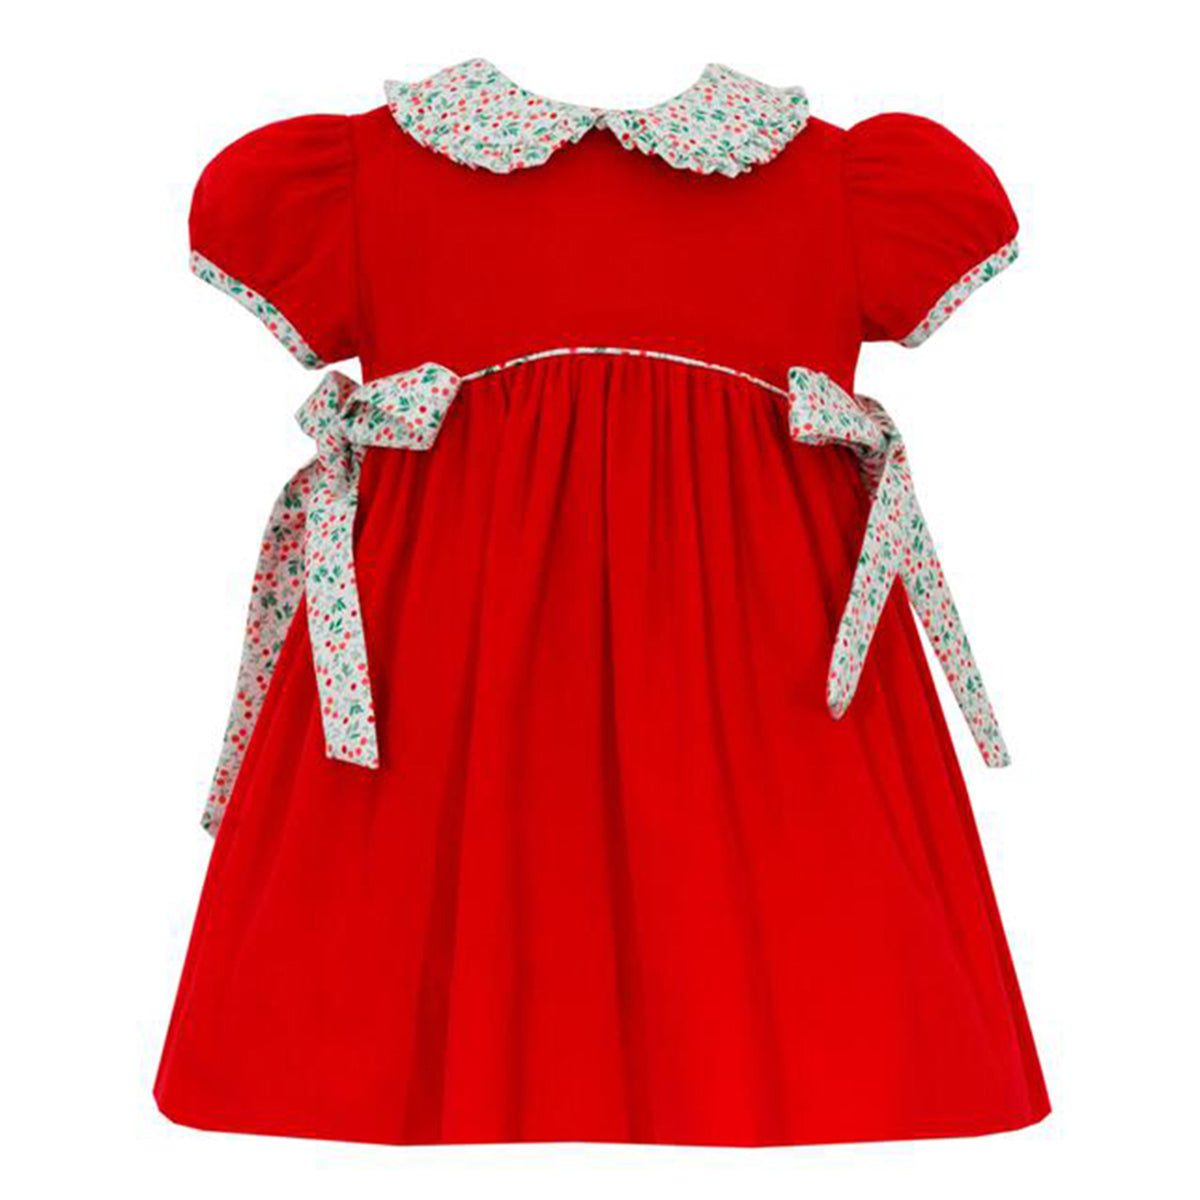 Little Girl's Christmas Holly Floral Bow Dress by Anavini